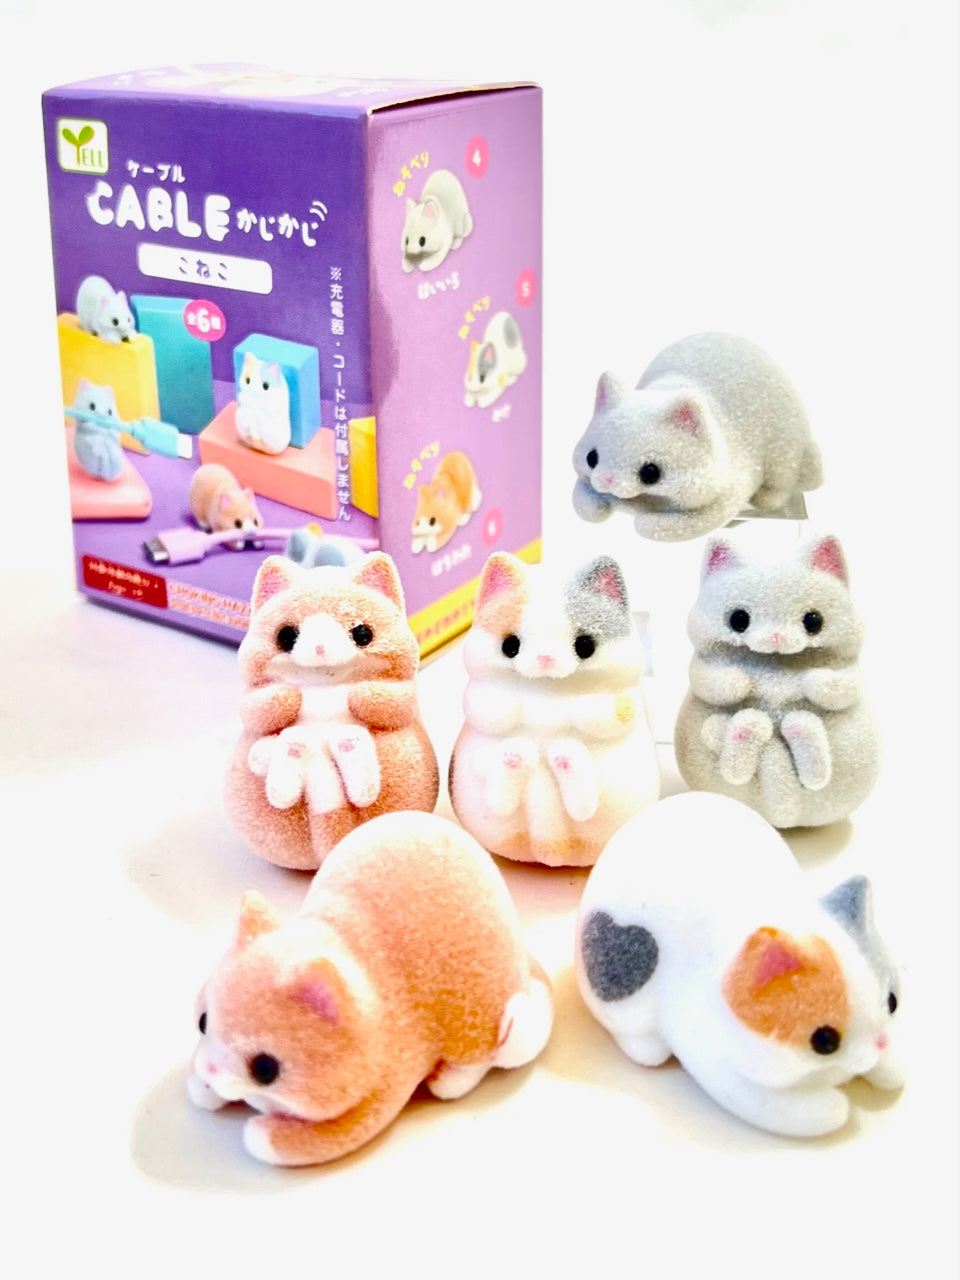 X 70758 CAT CABLE HOLDER BLIND BOX-DISCONTINUED